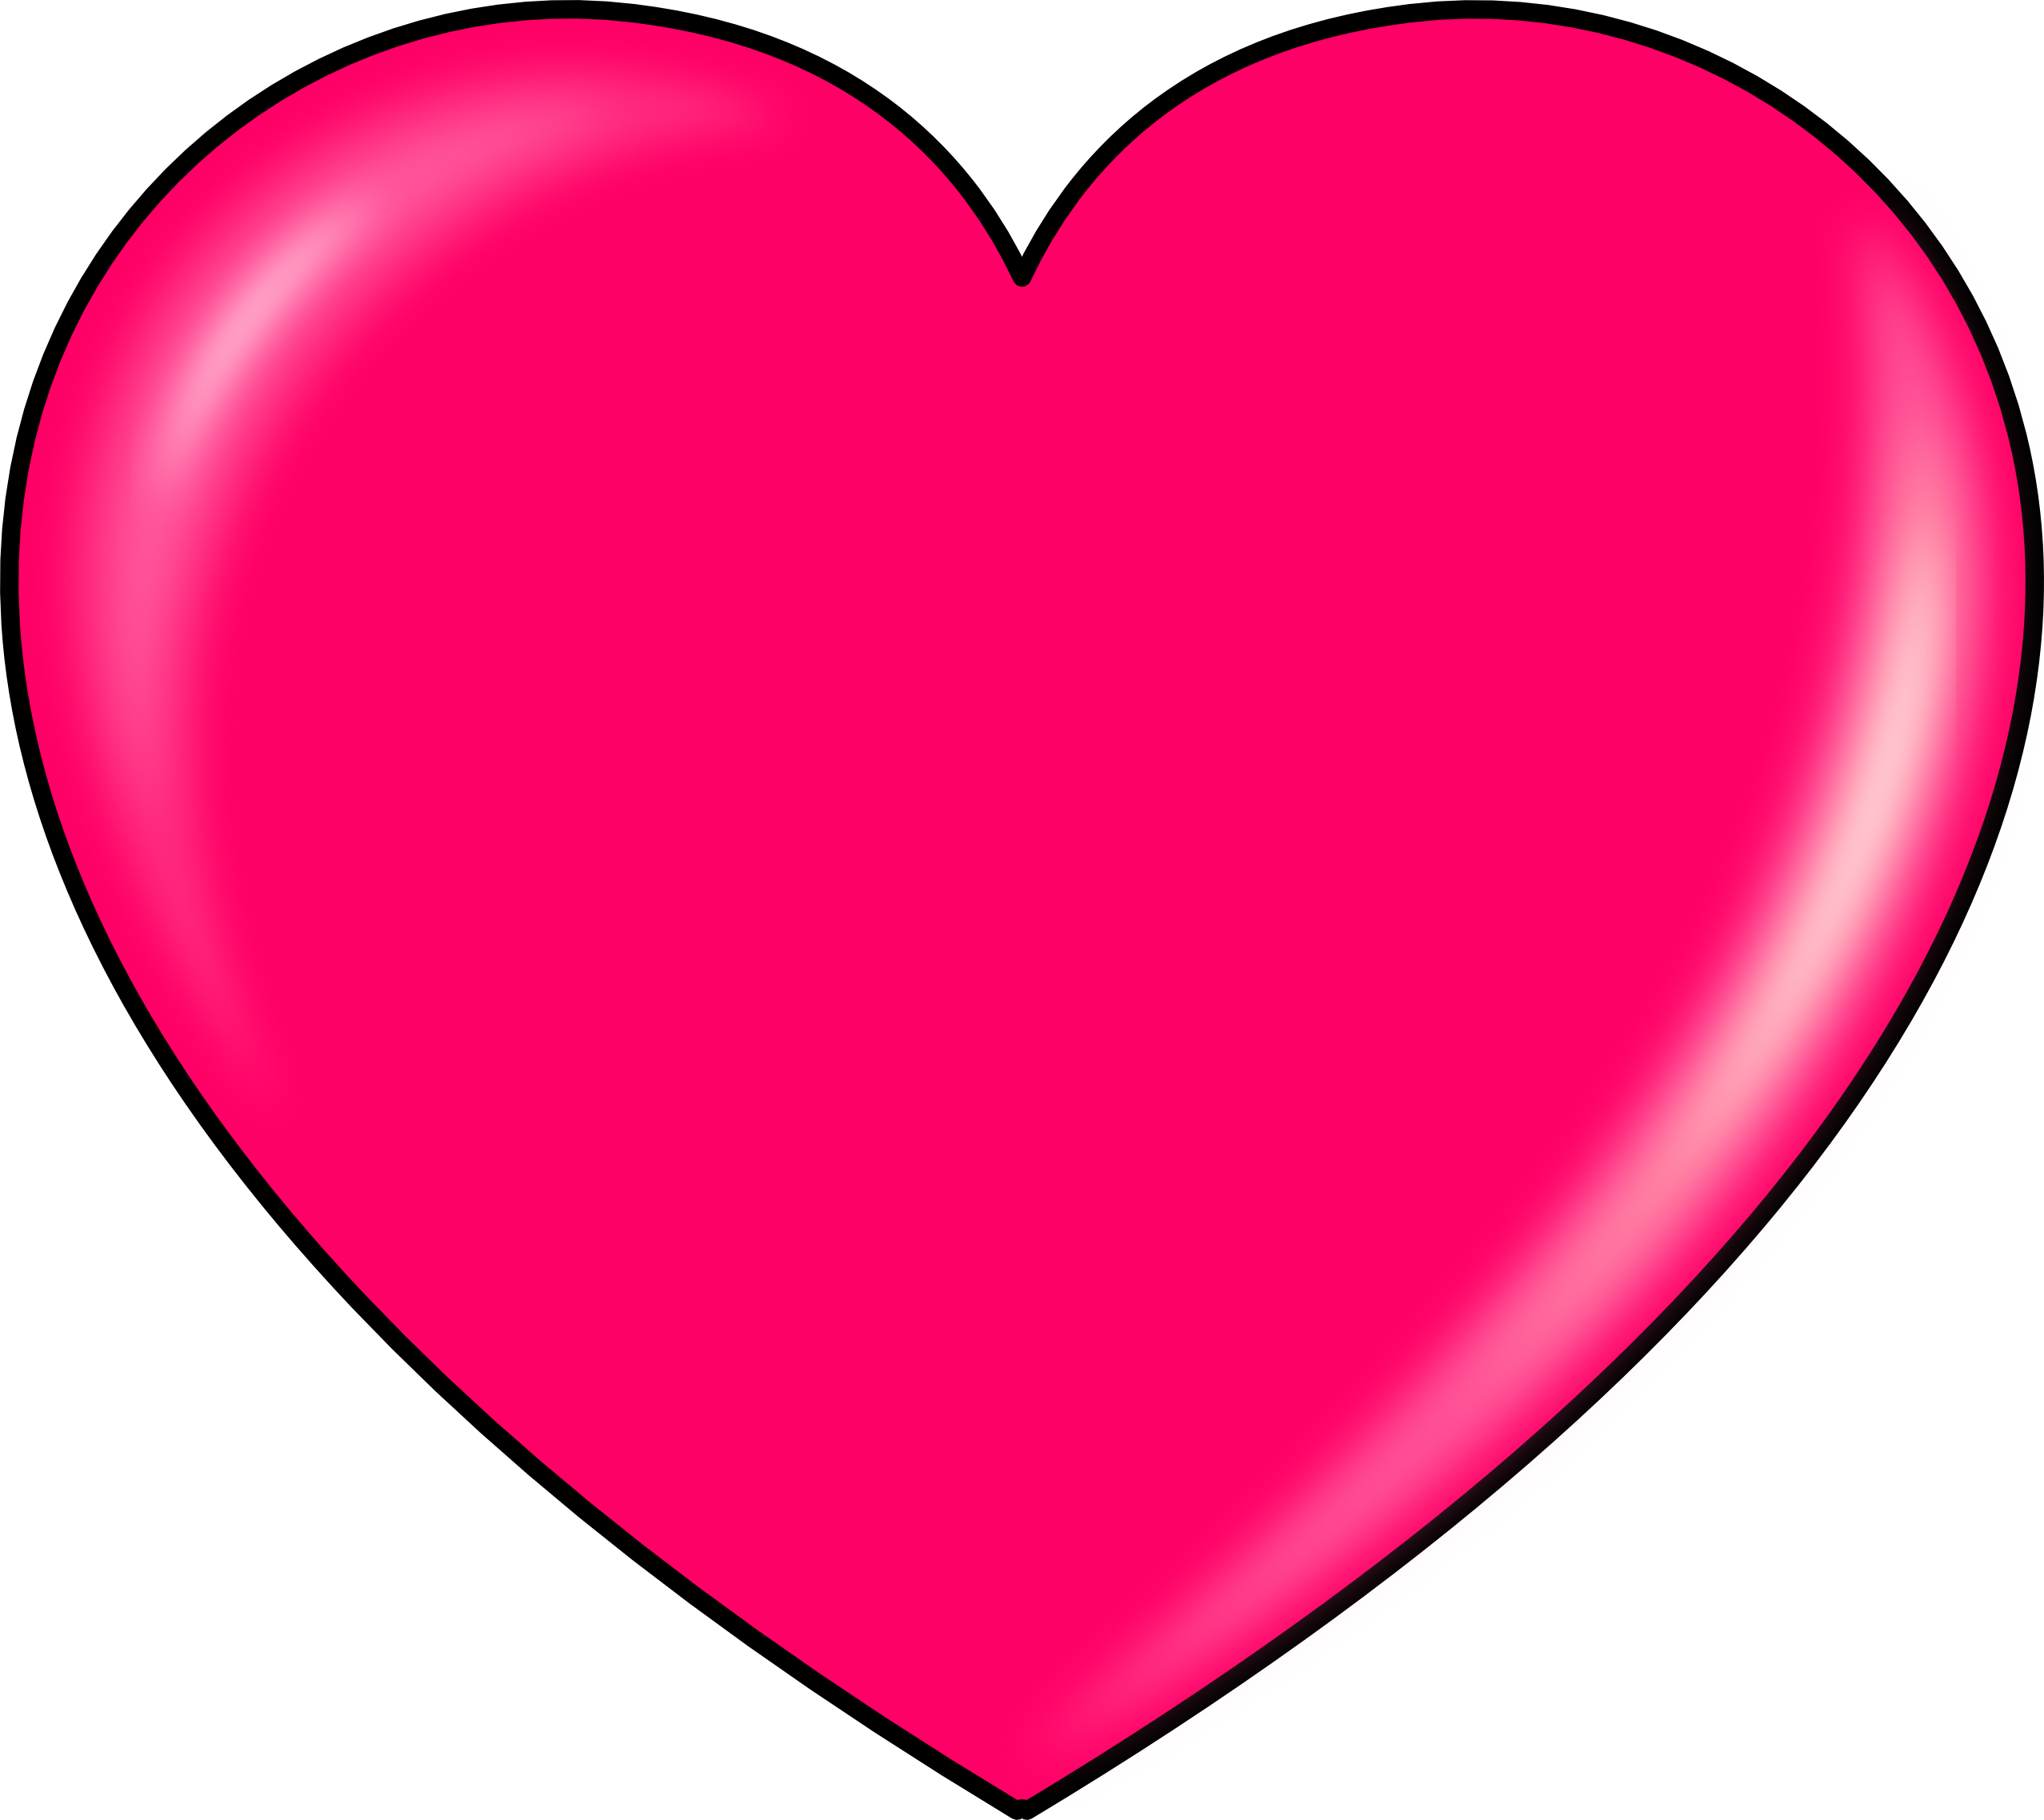 Heart PNG free images, download